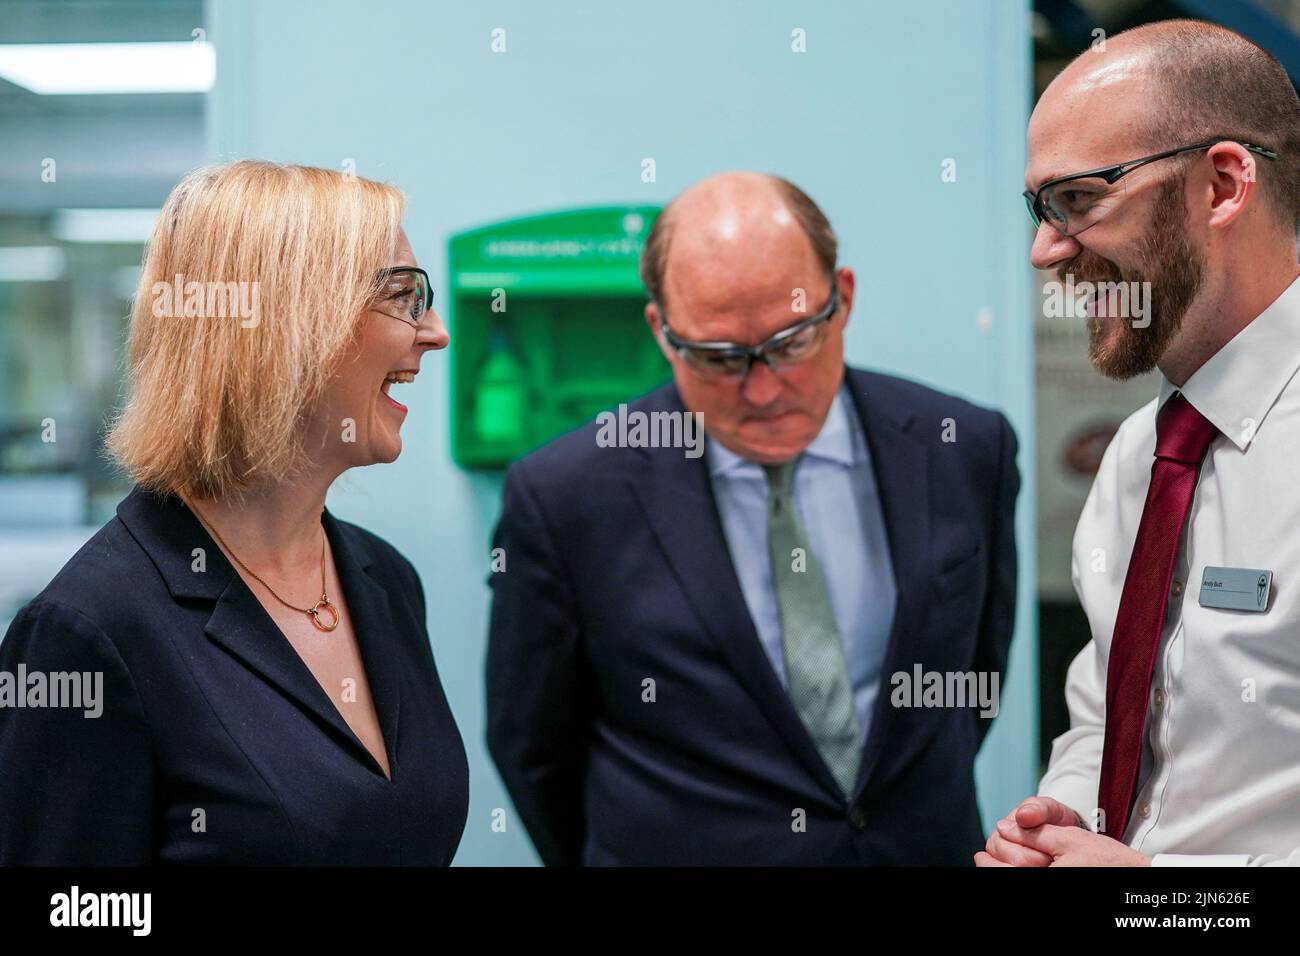 Britain's Conservative Party leadership candidate Liz Truss and British Defence Secretary Ben Wallace visit the Reliance Precision engineering company ahead of a hustings event later, in Huddersfield, Britain August 9, 2022. Ian Forsyth/Pool via REUTERS Stock Photo